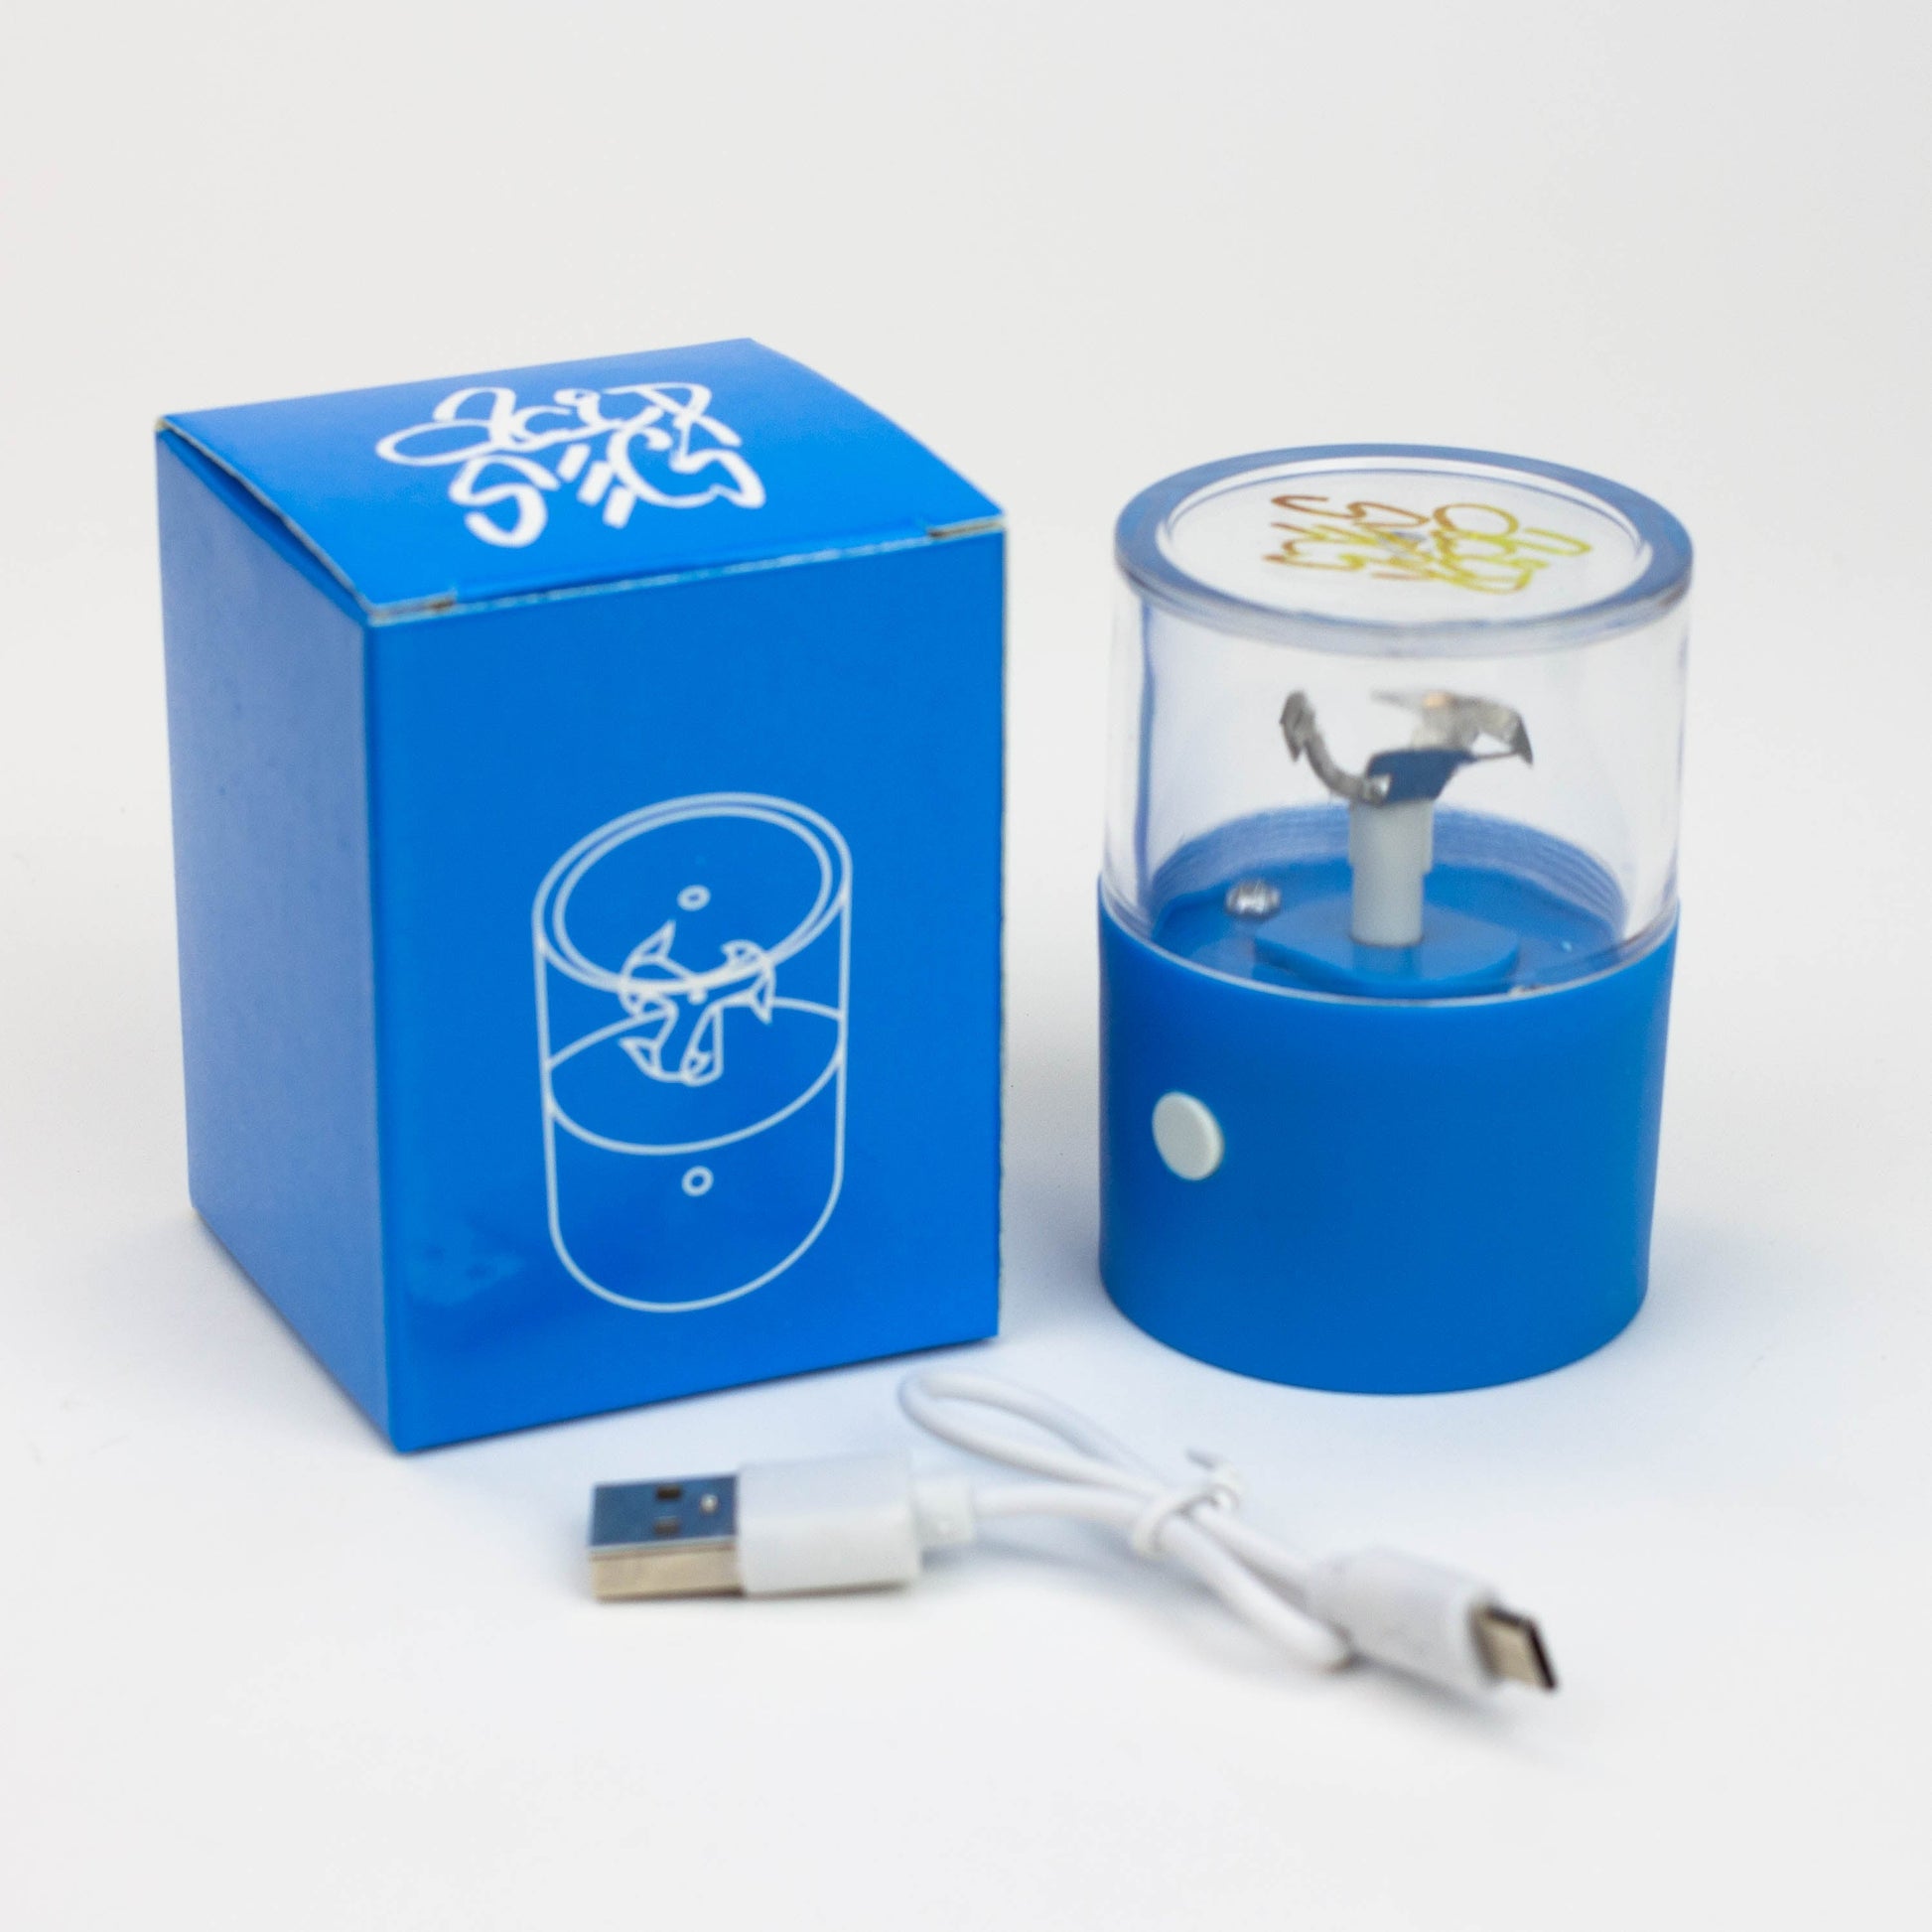 Acid Secs Electric Herb grinder with USB charger_2